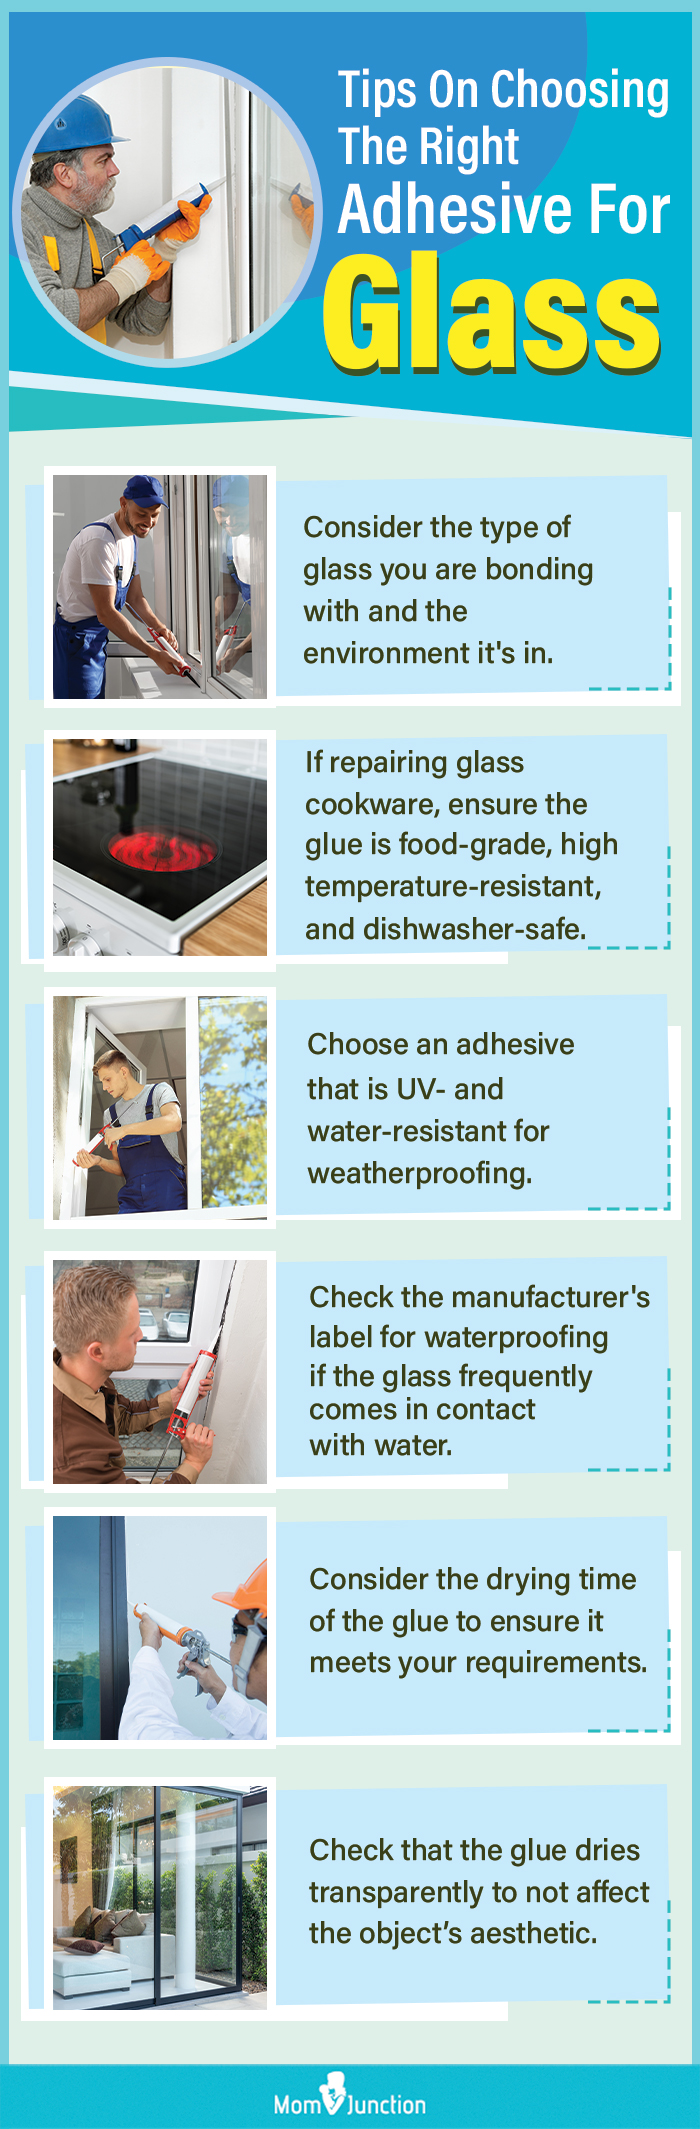 Tips On Choosing The Right Adhesive For Glass (infographic)